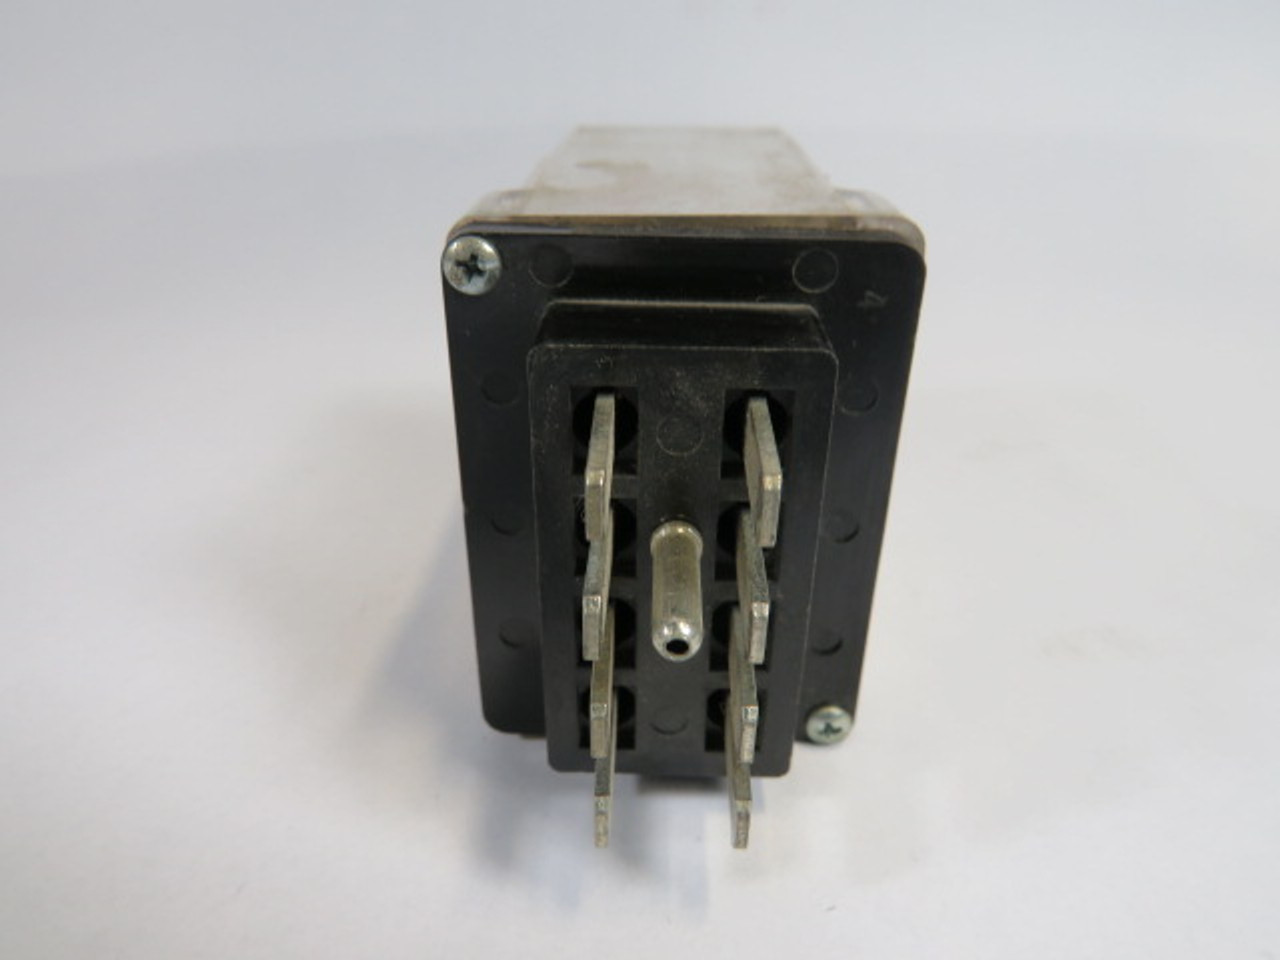 Midtex 136-62T3A1 Relay 30A 120/240VAC USED